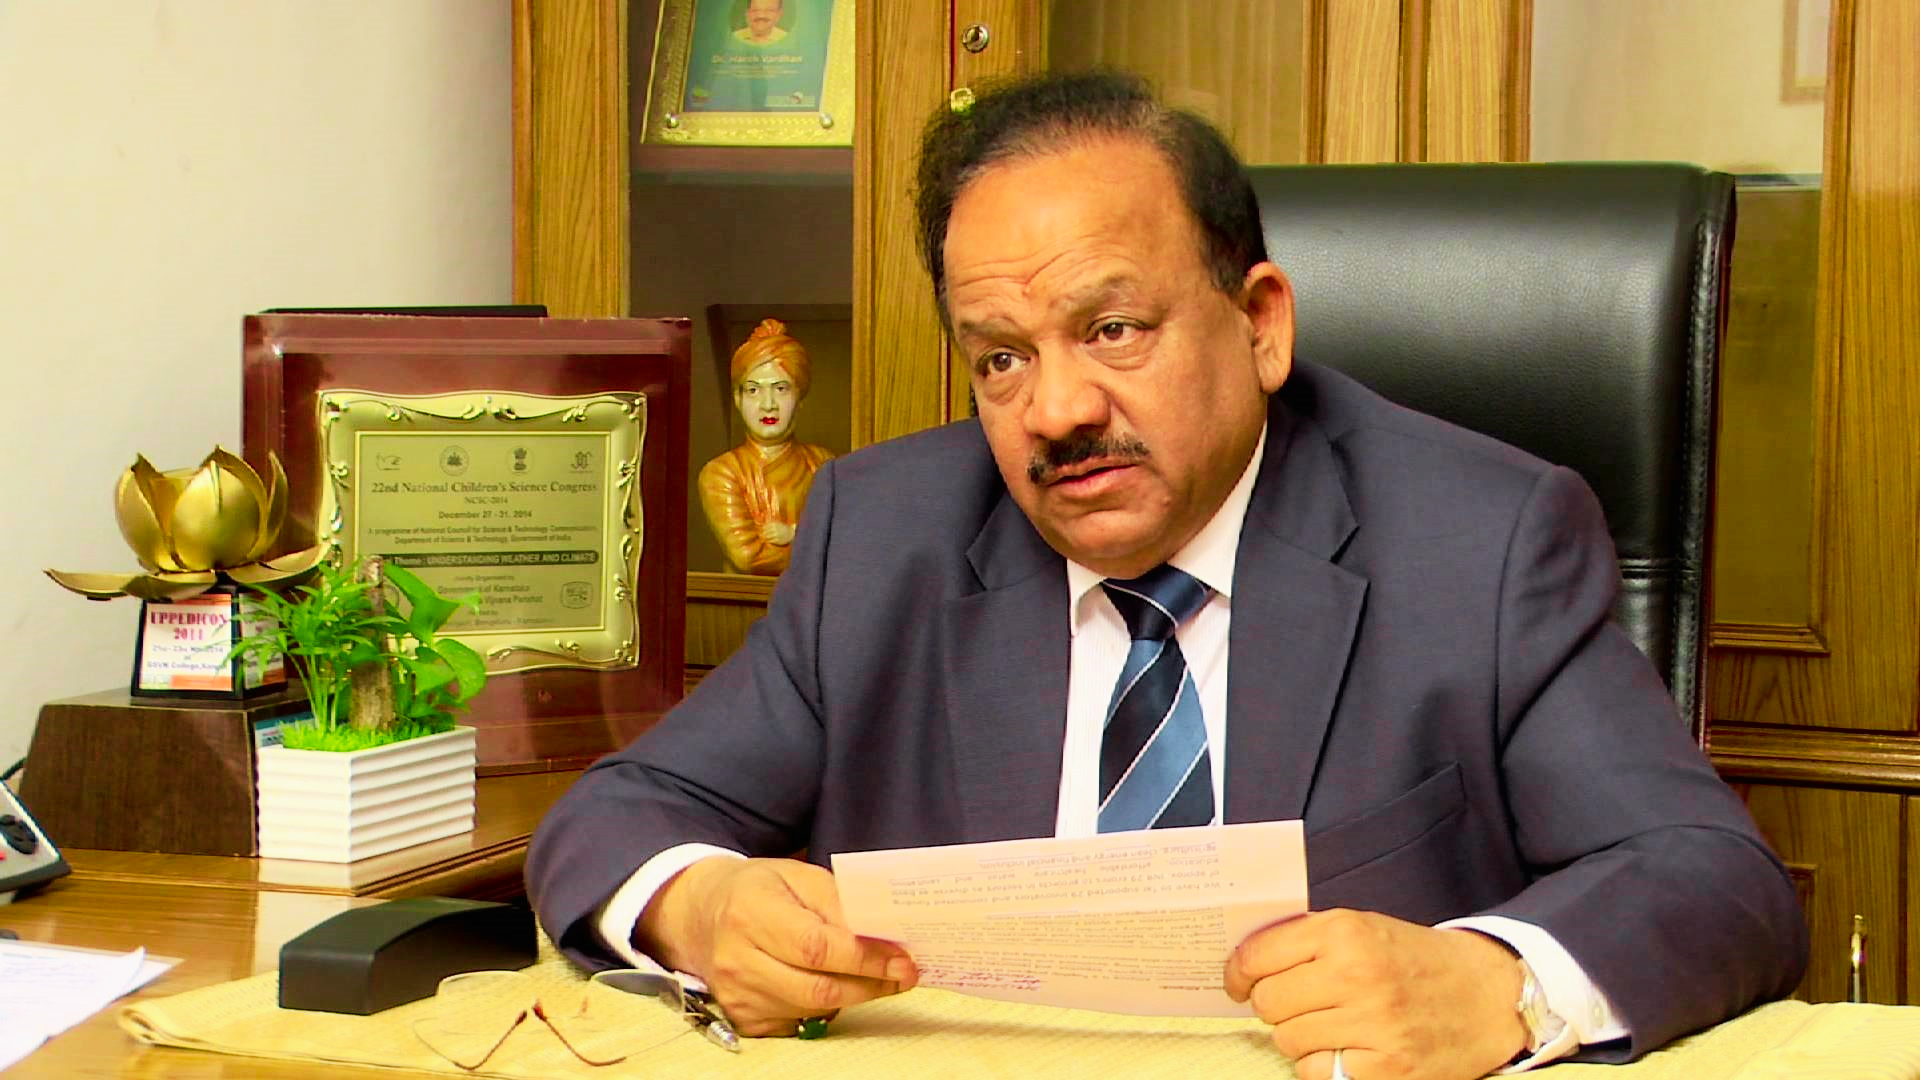 Former Health Minister Dr. Harsh Vardhan Quits Politics, Returns To His Clinic